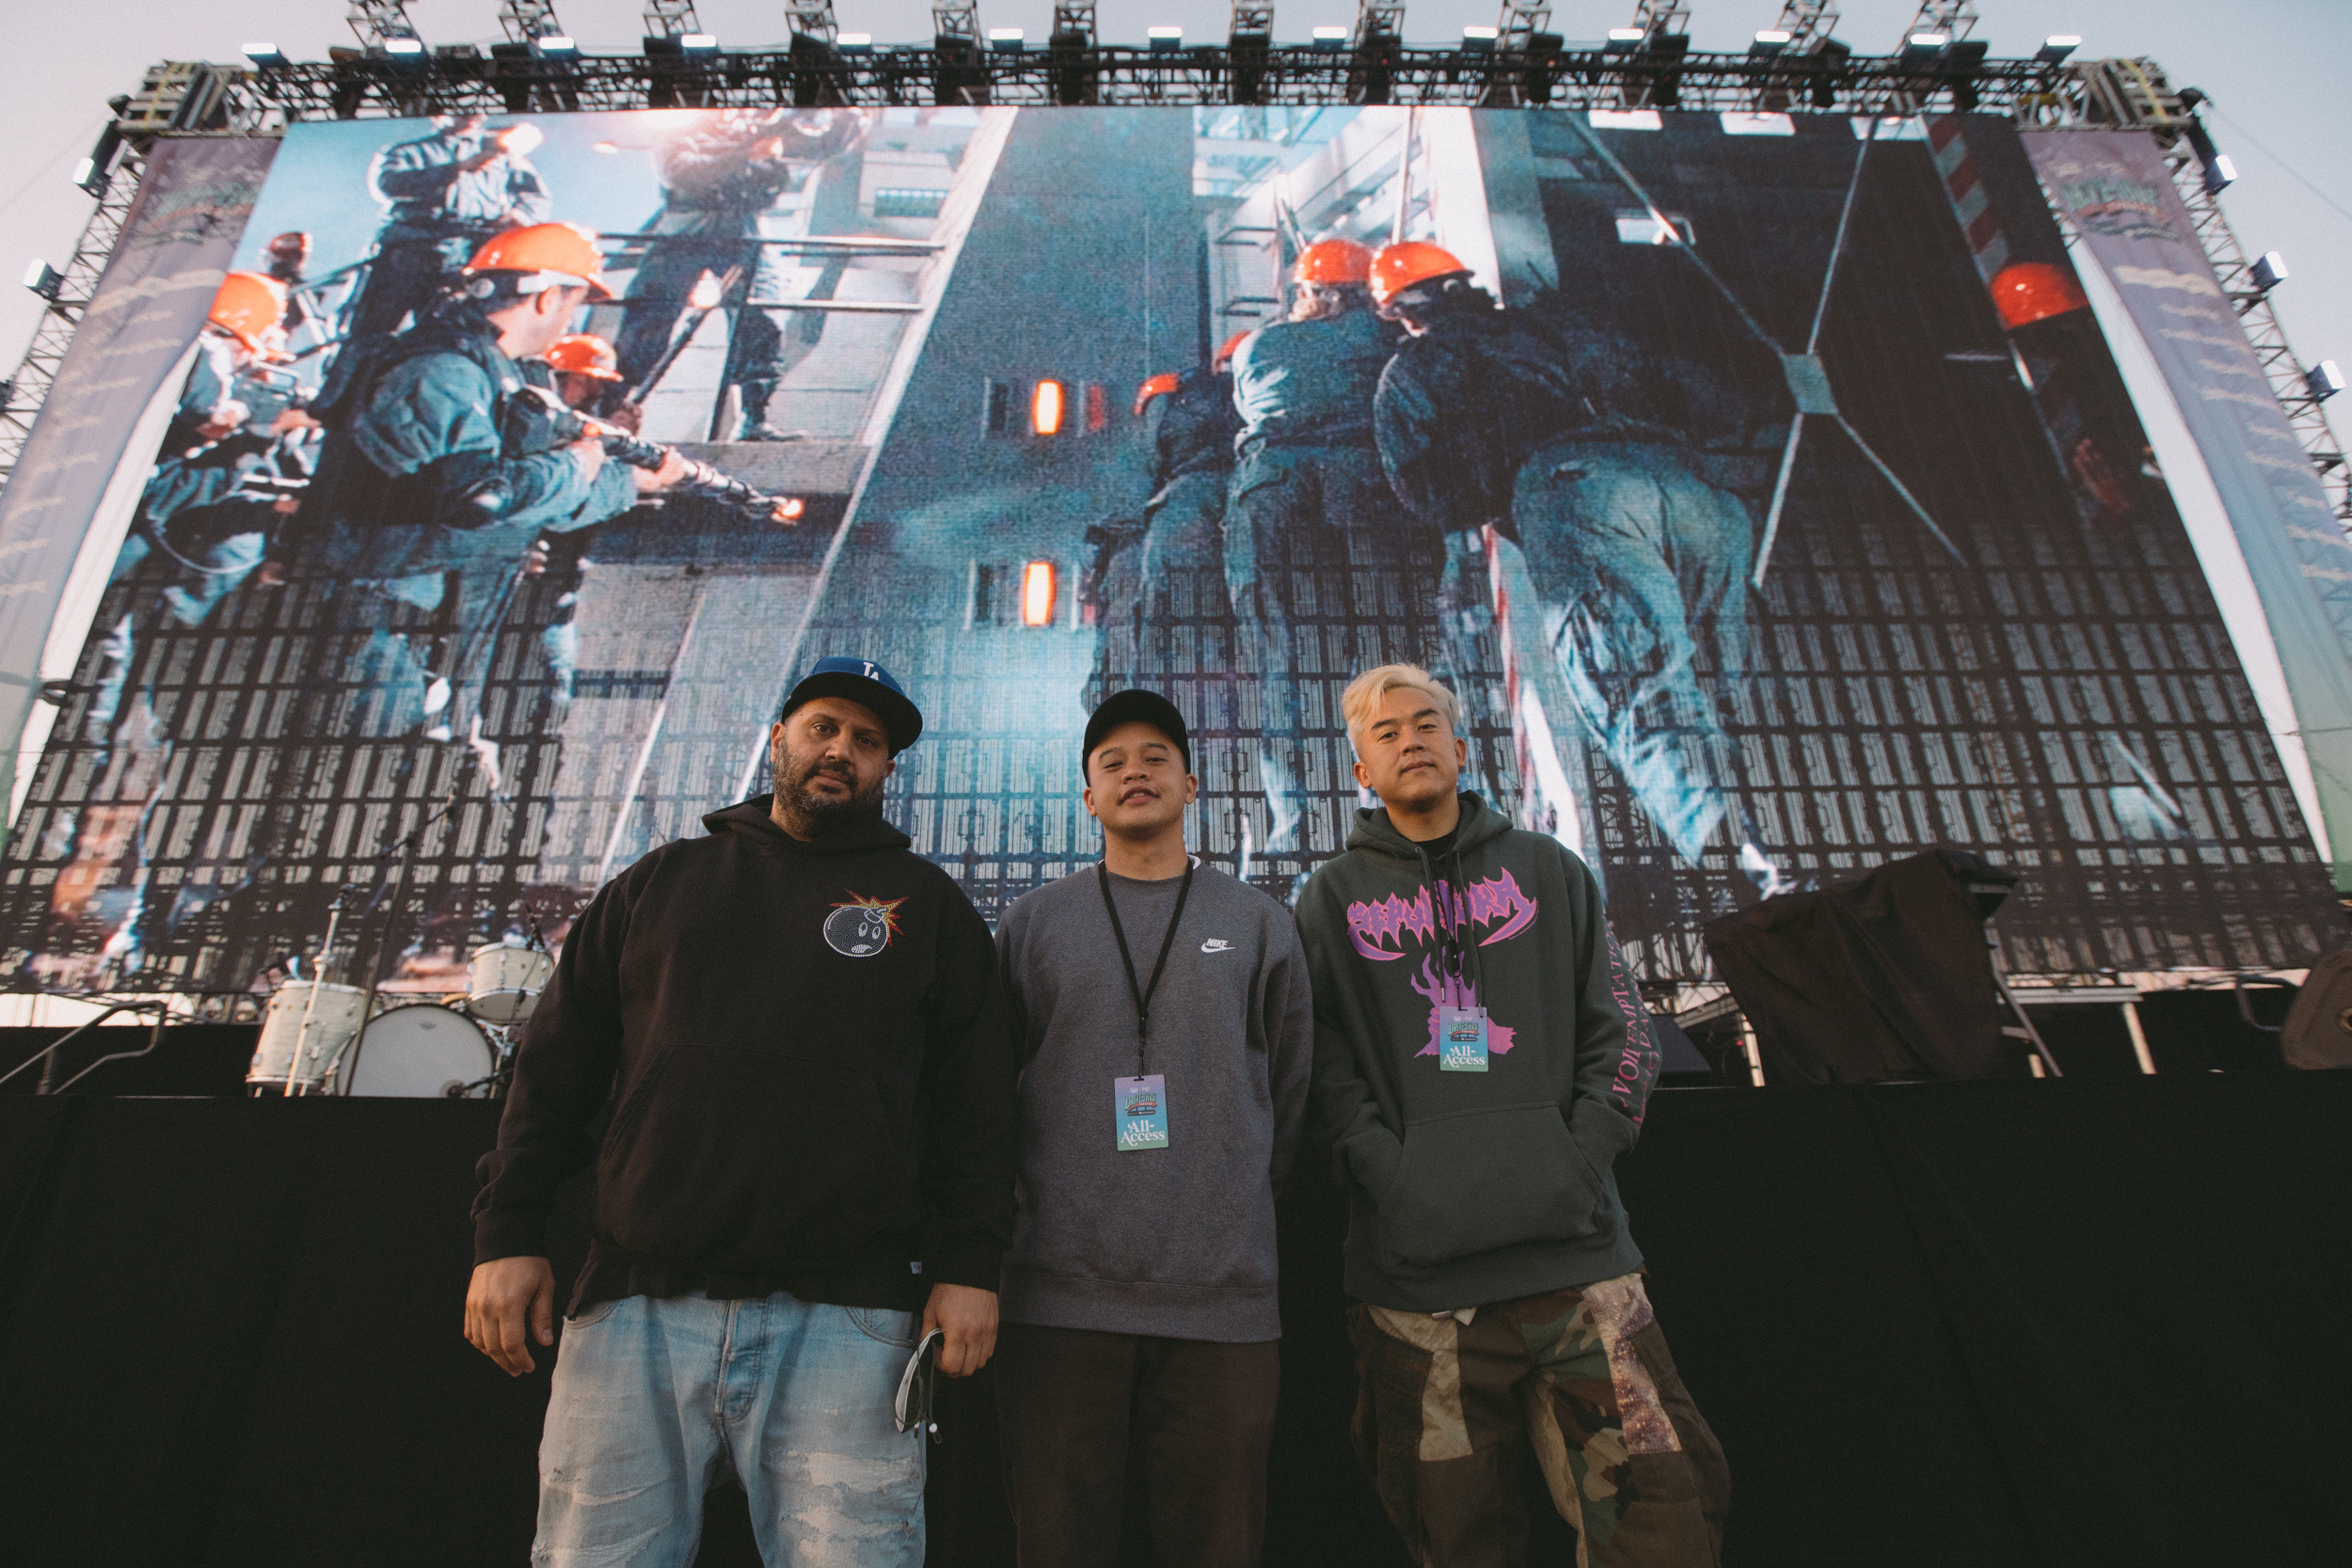 Three men stand wearing streetwear in front of a music performance stange.